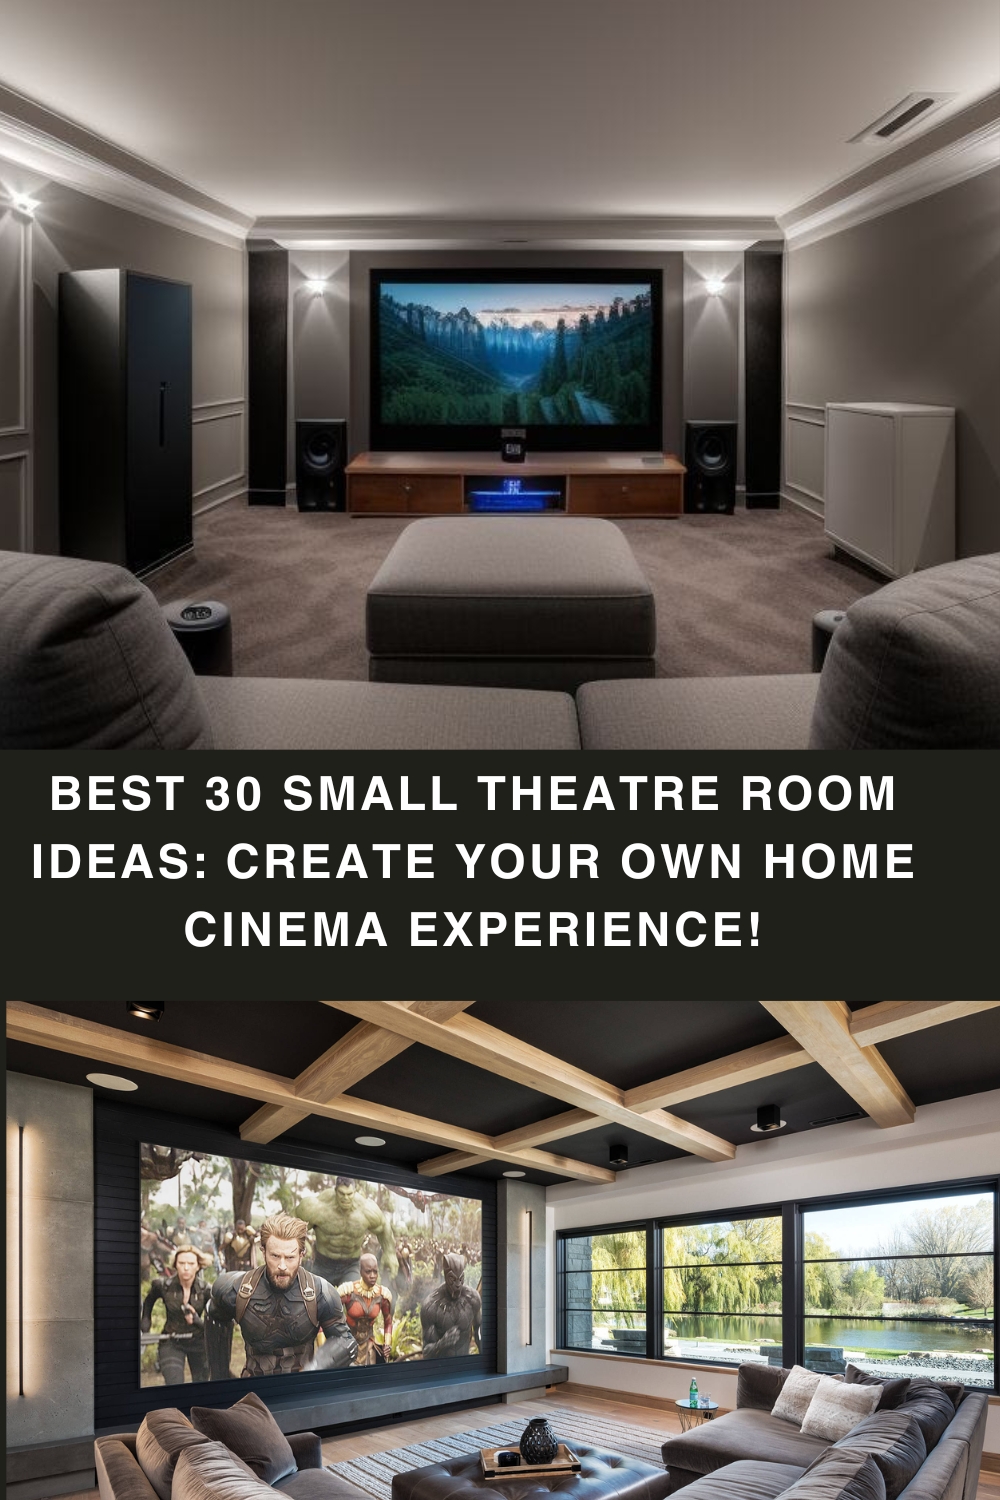 Best 30 Small Theatre Room Ideas: Create Your Own Home Cinema Experience! pin